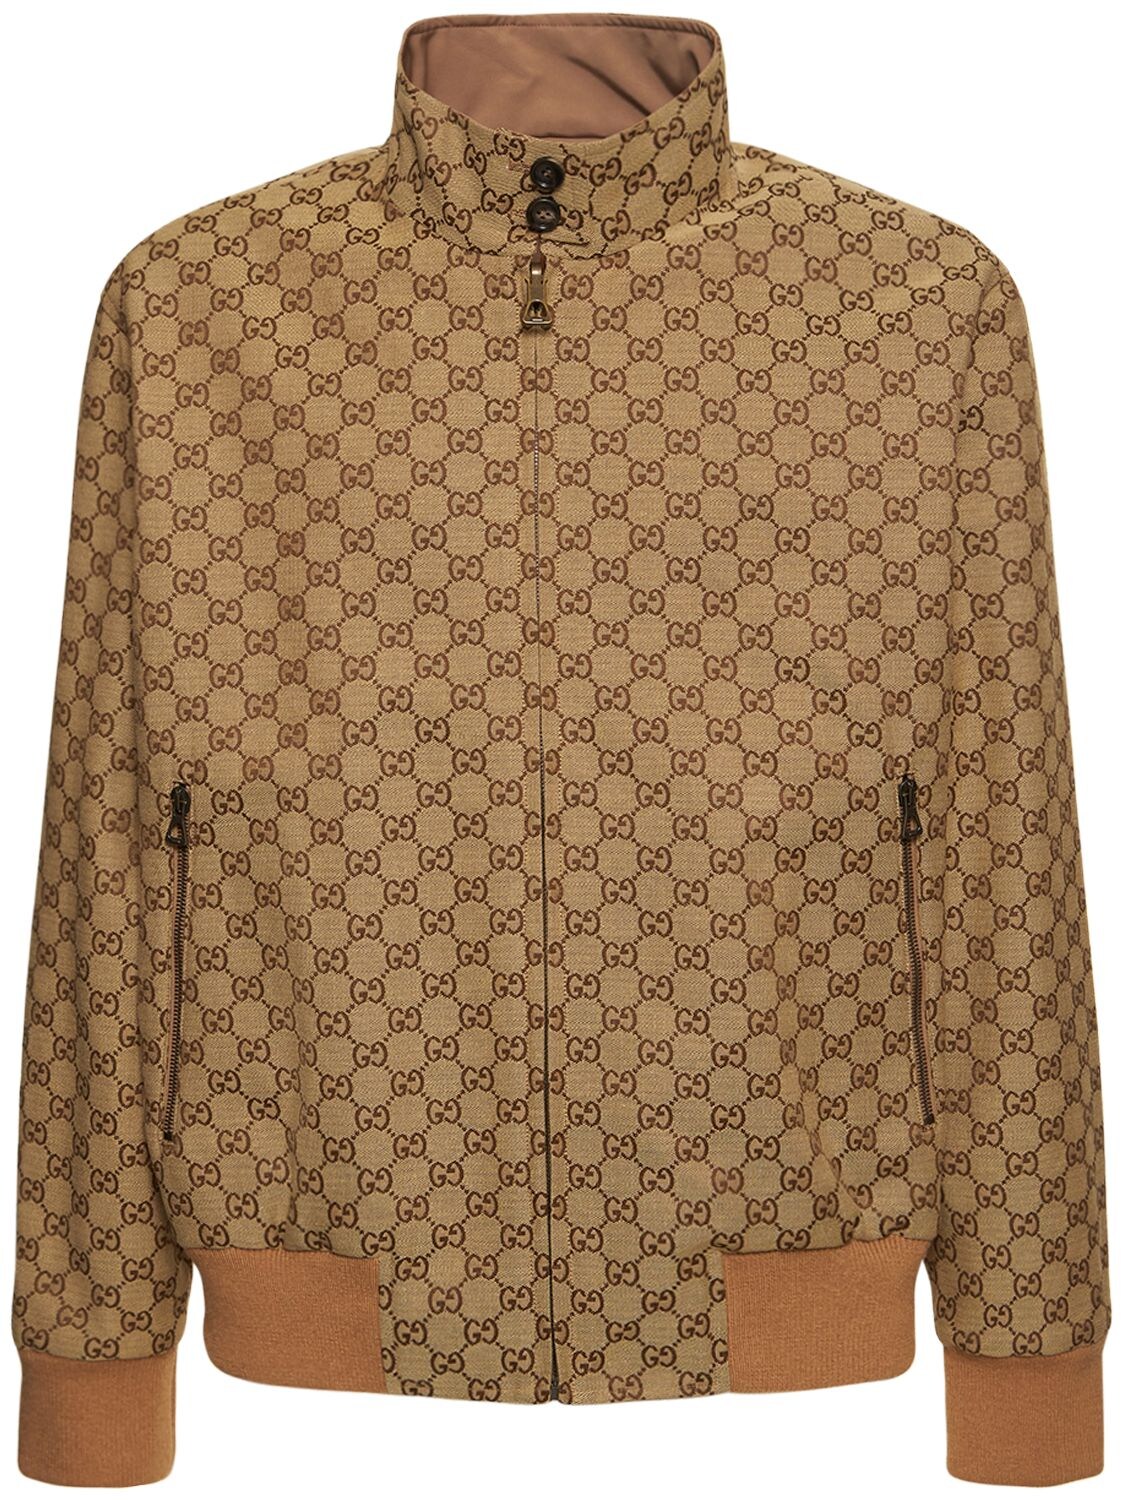 Shop GUCCI Gg leather bomber jacket (673925 XNAPN 1000) by arcobaleno_